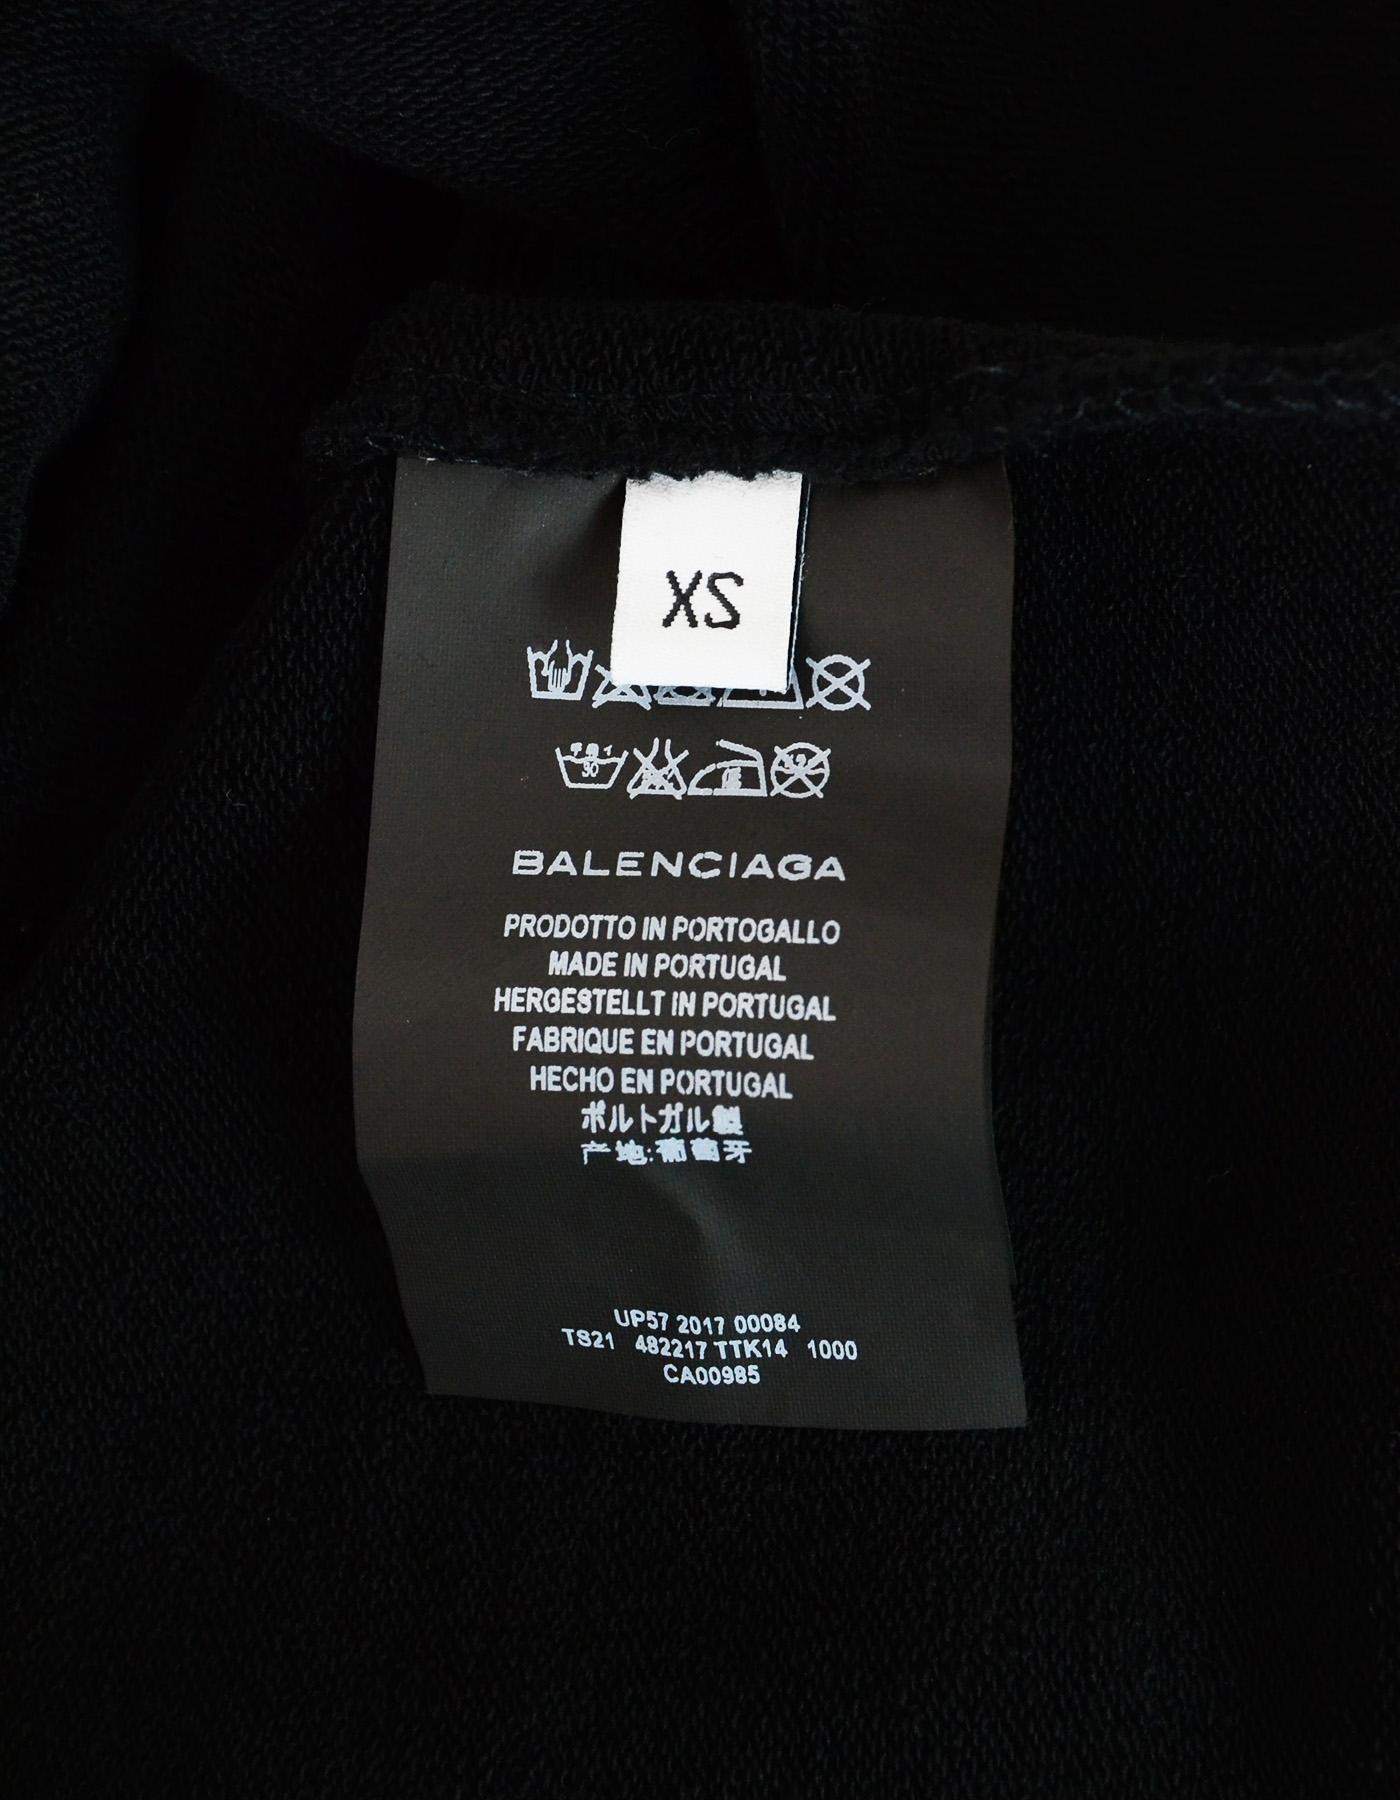 Balenciaga Black Femme Fatale Oversized Hoodie Sweatshirt, 2018  In Excellent Condition In New York, NY